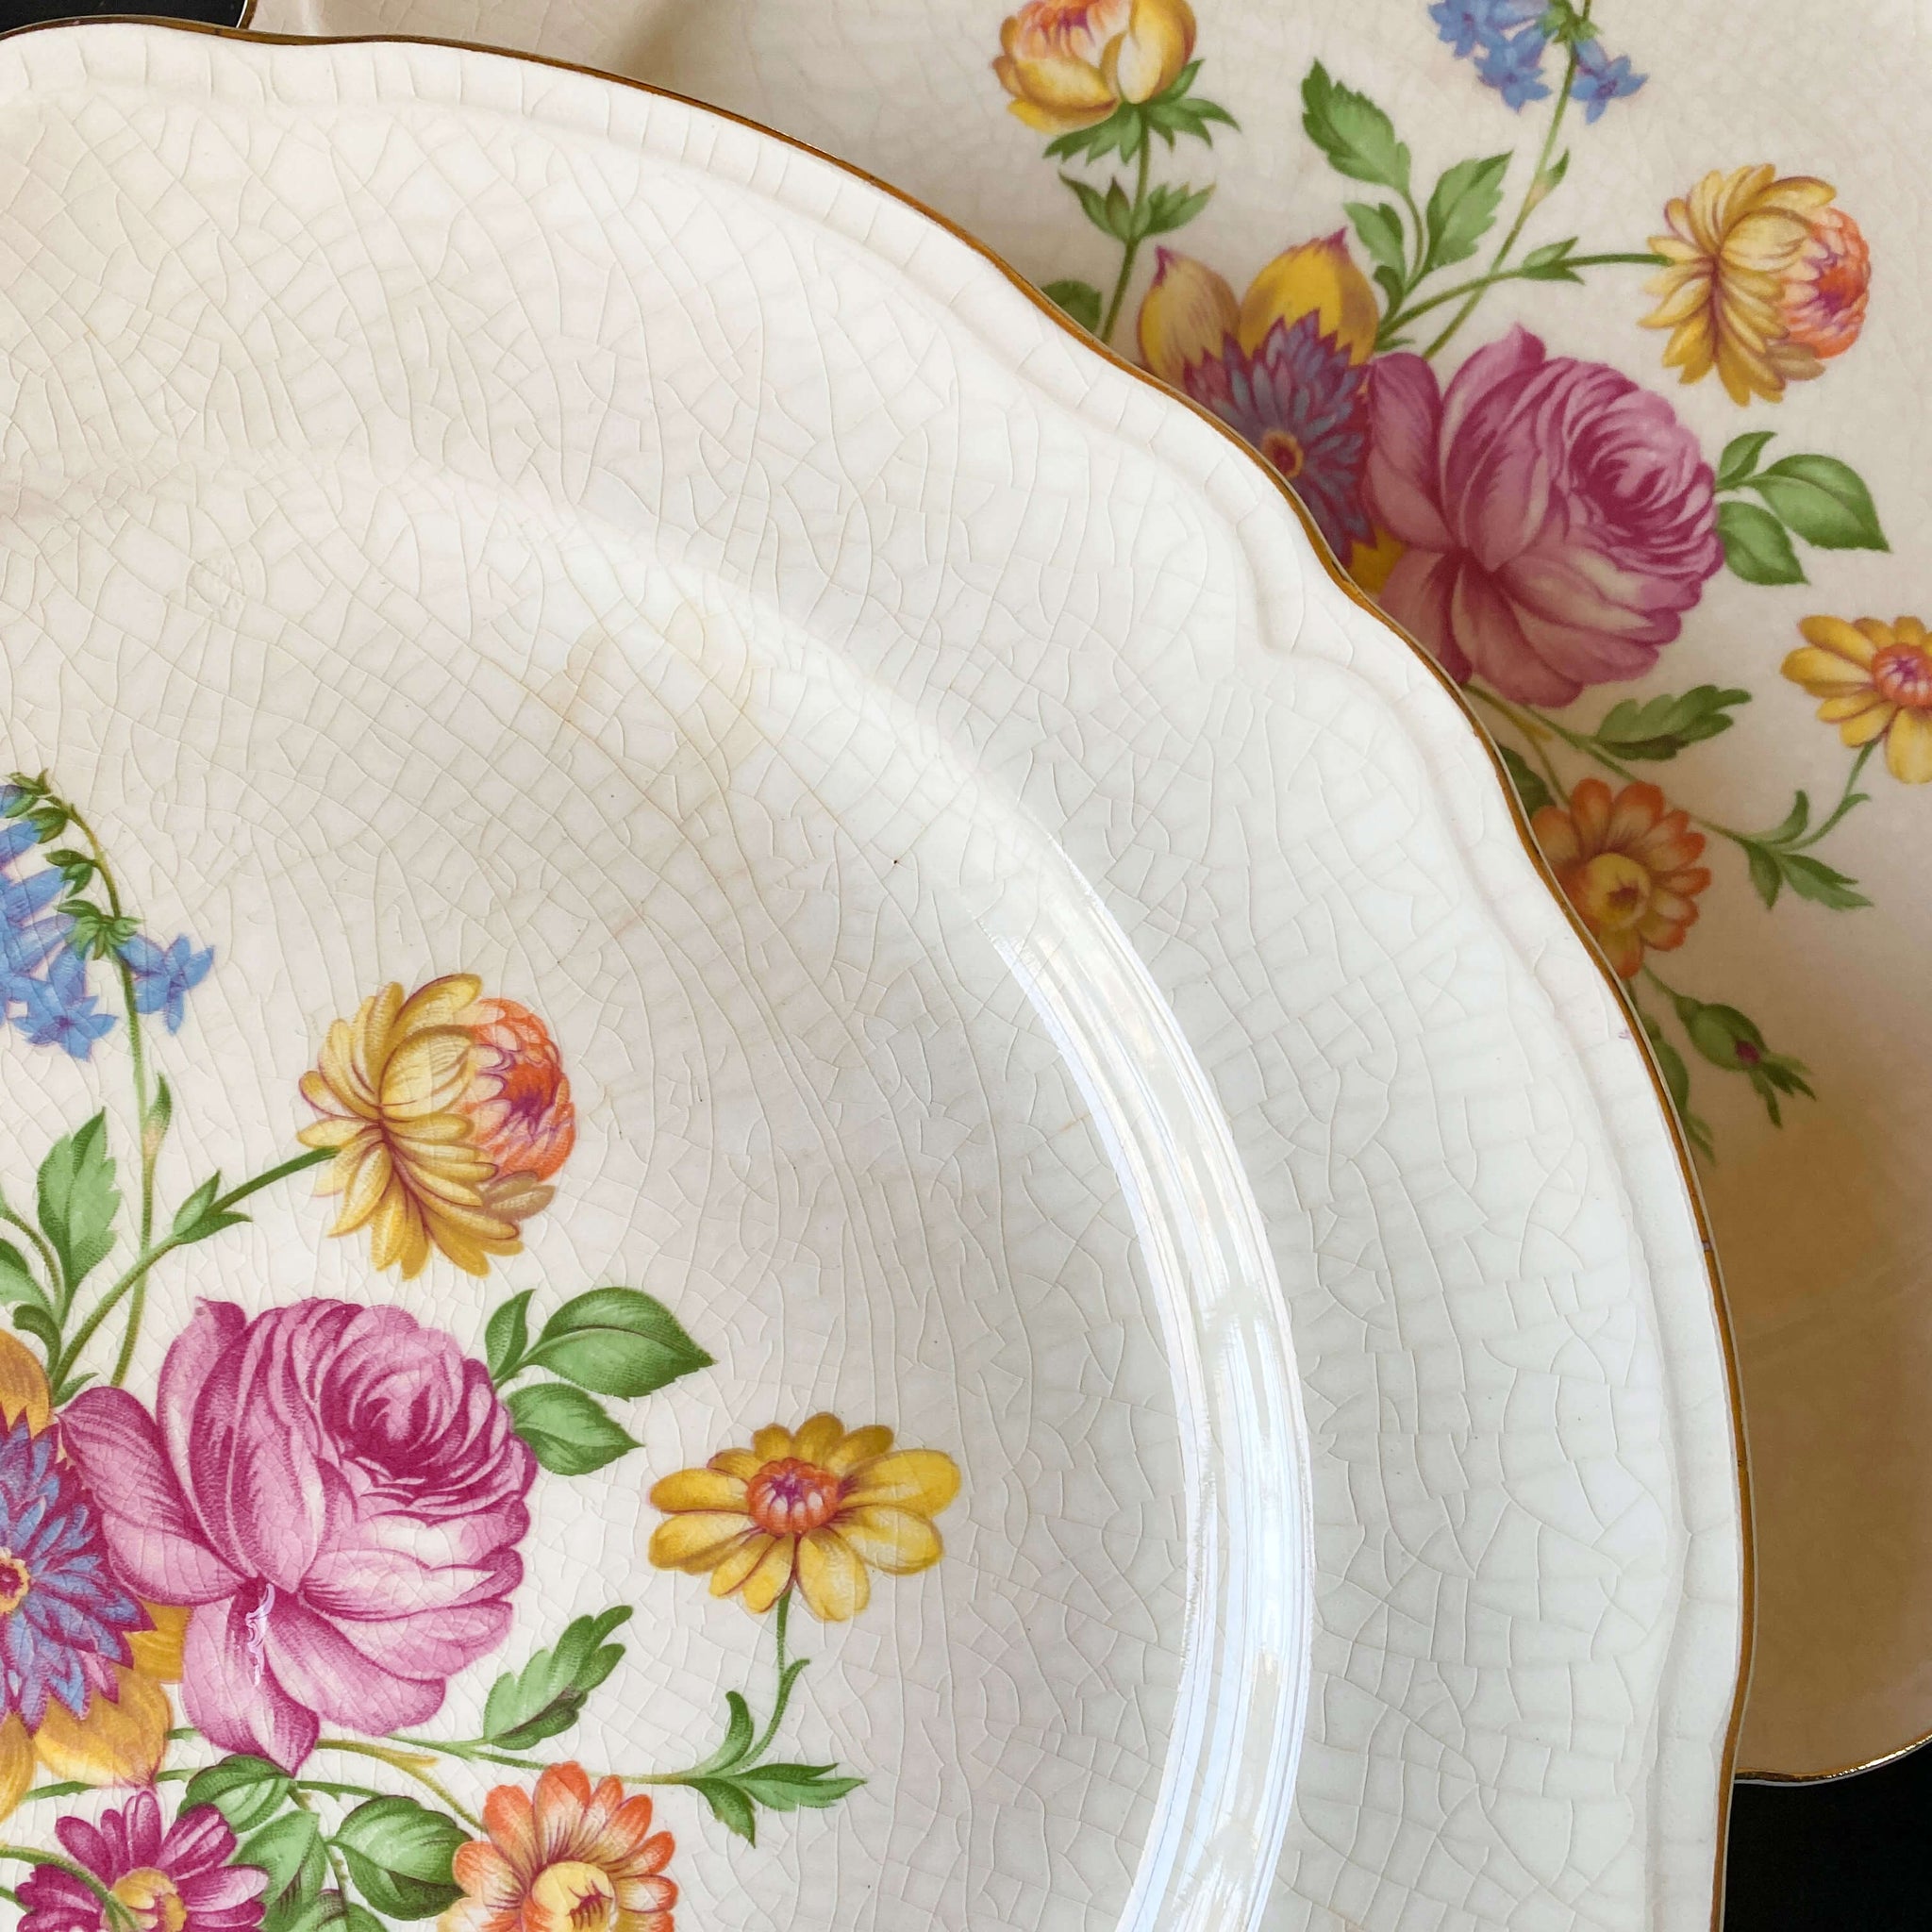 Vintage 1950s Multifloral Dinner Plates by Edwin Knowles - Set of Five